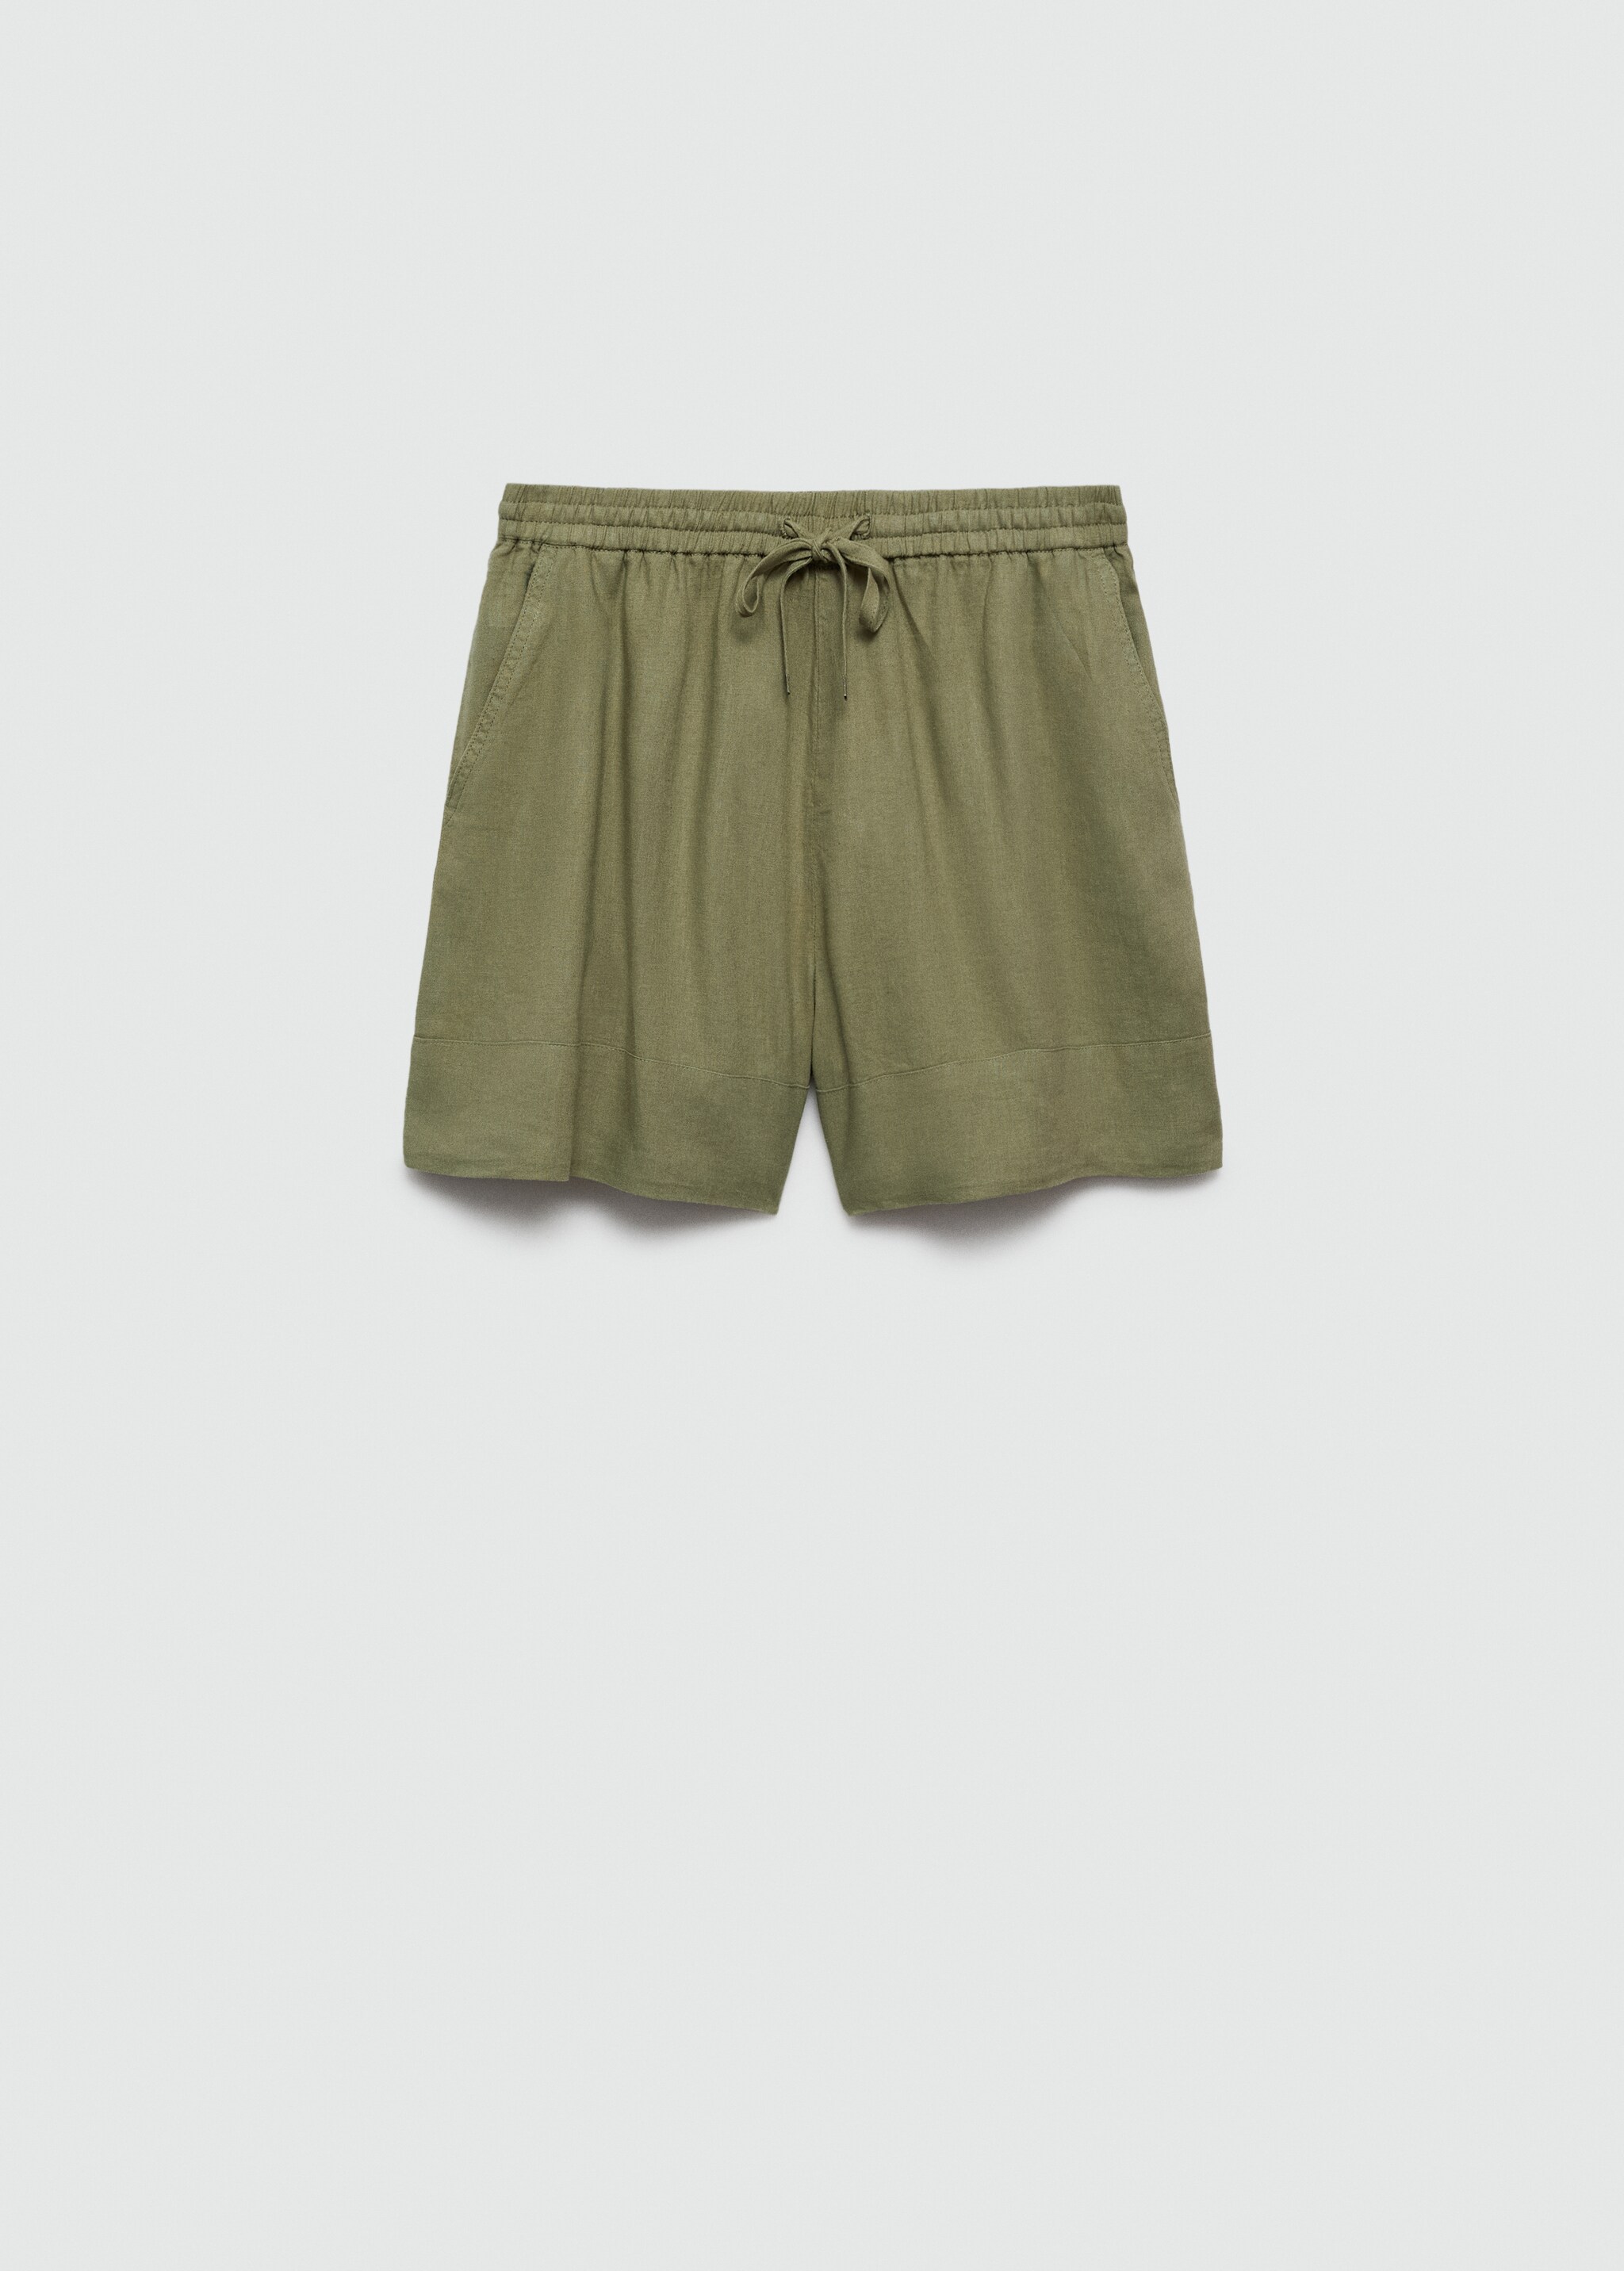 Fluid tie shorts - Article without model